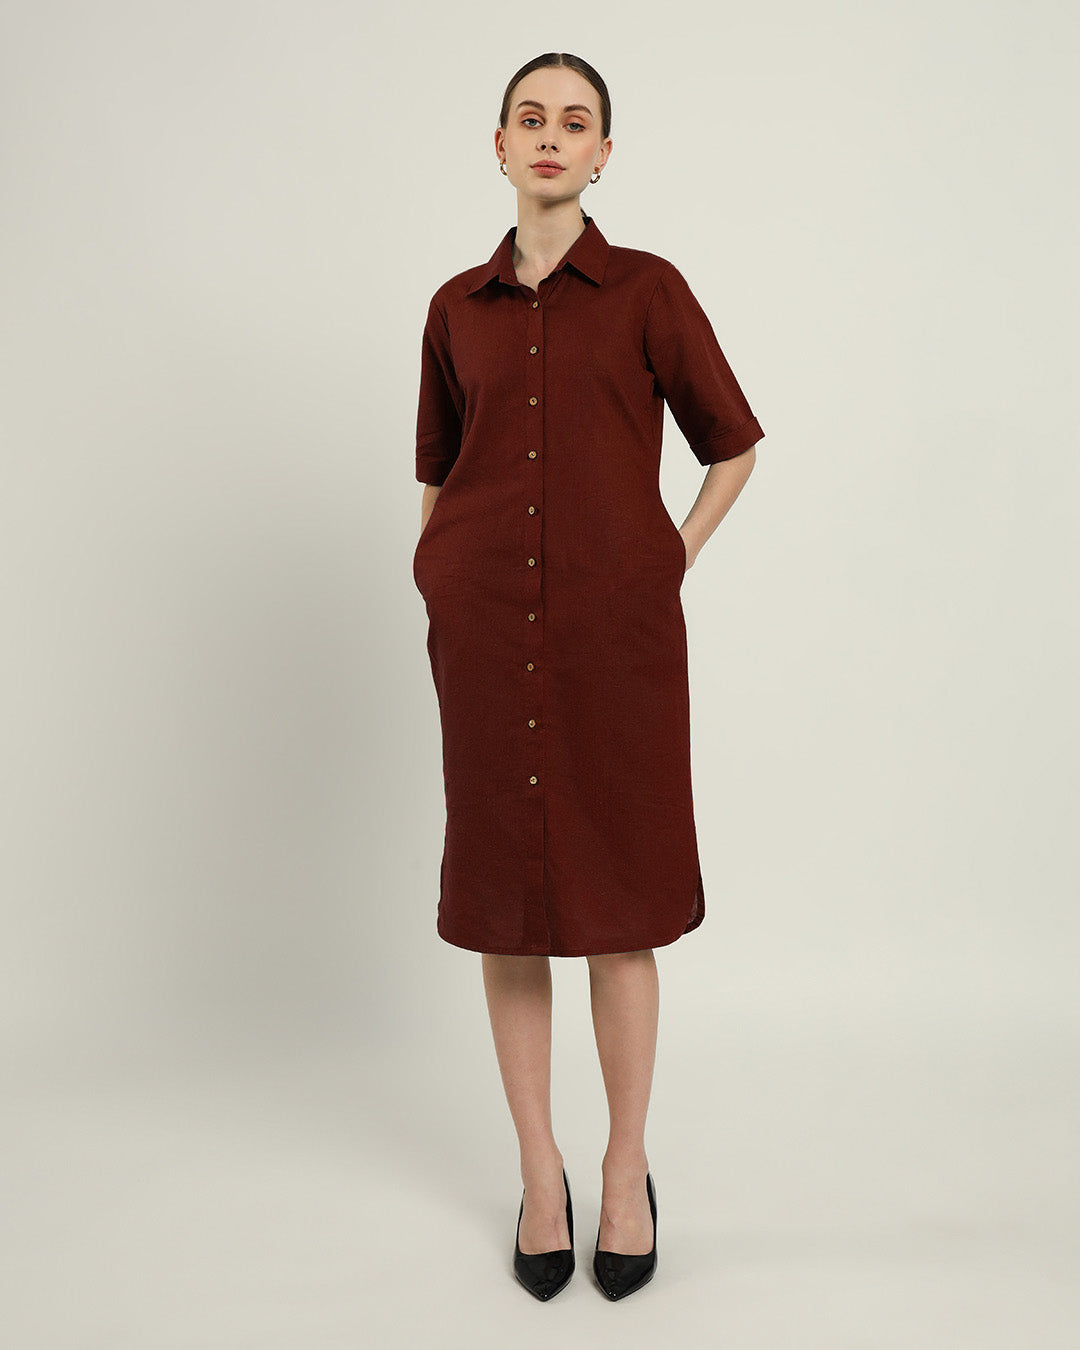 The Tampa Rouge Cotton Dress